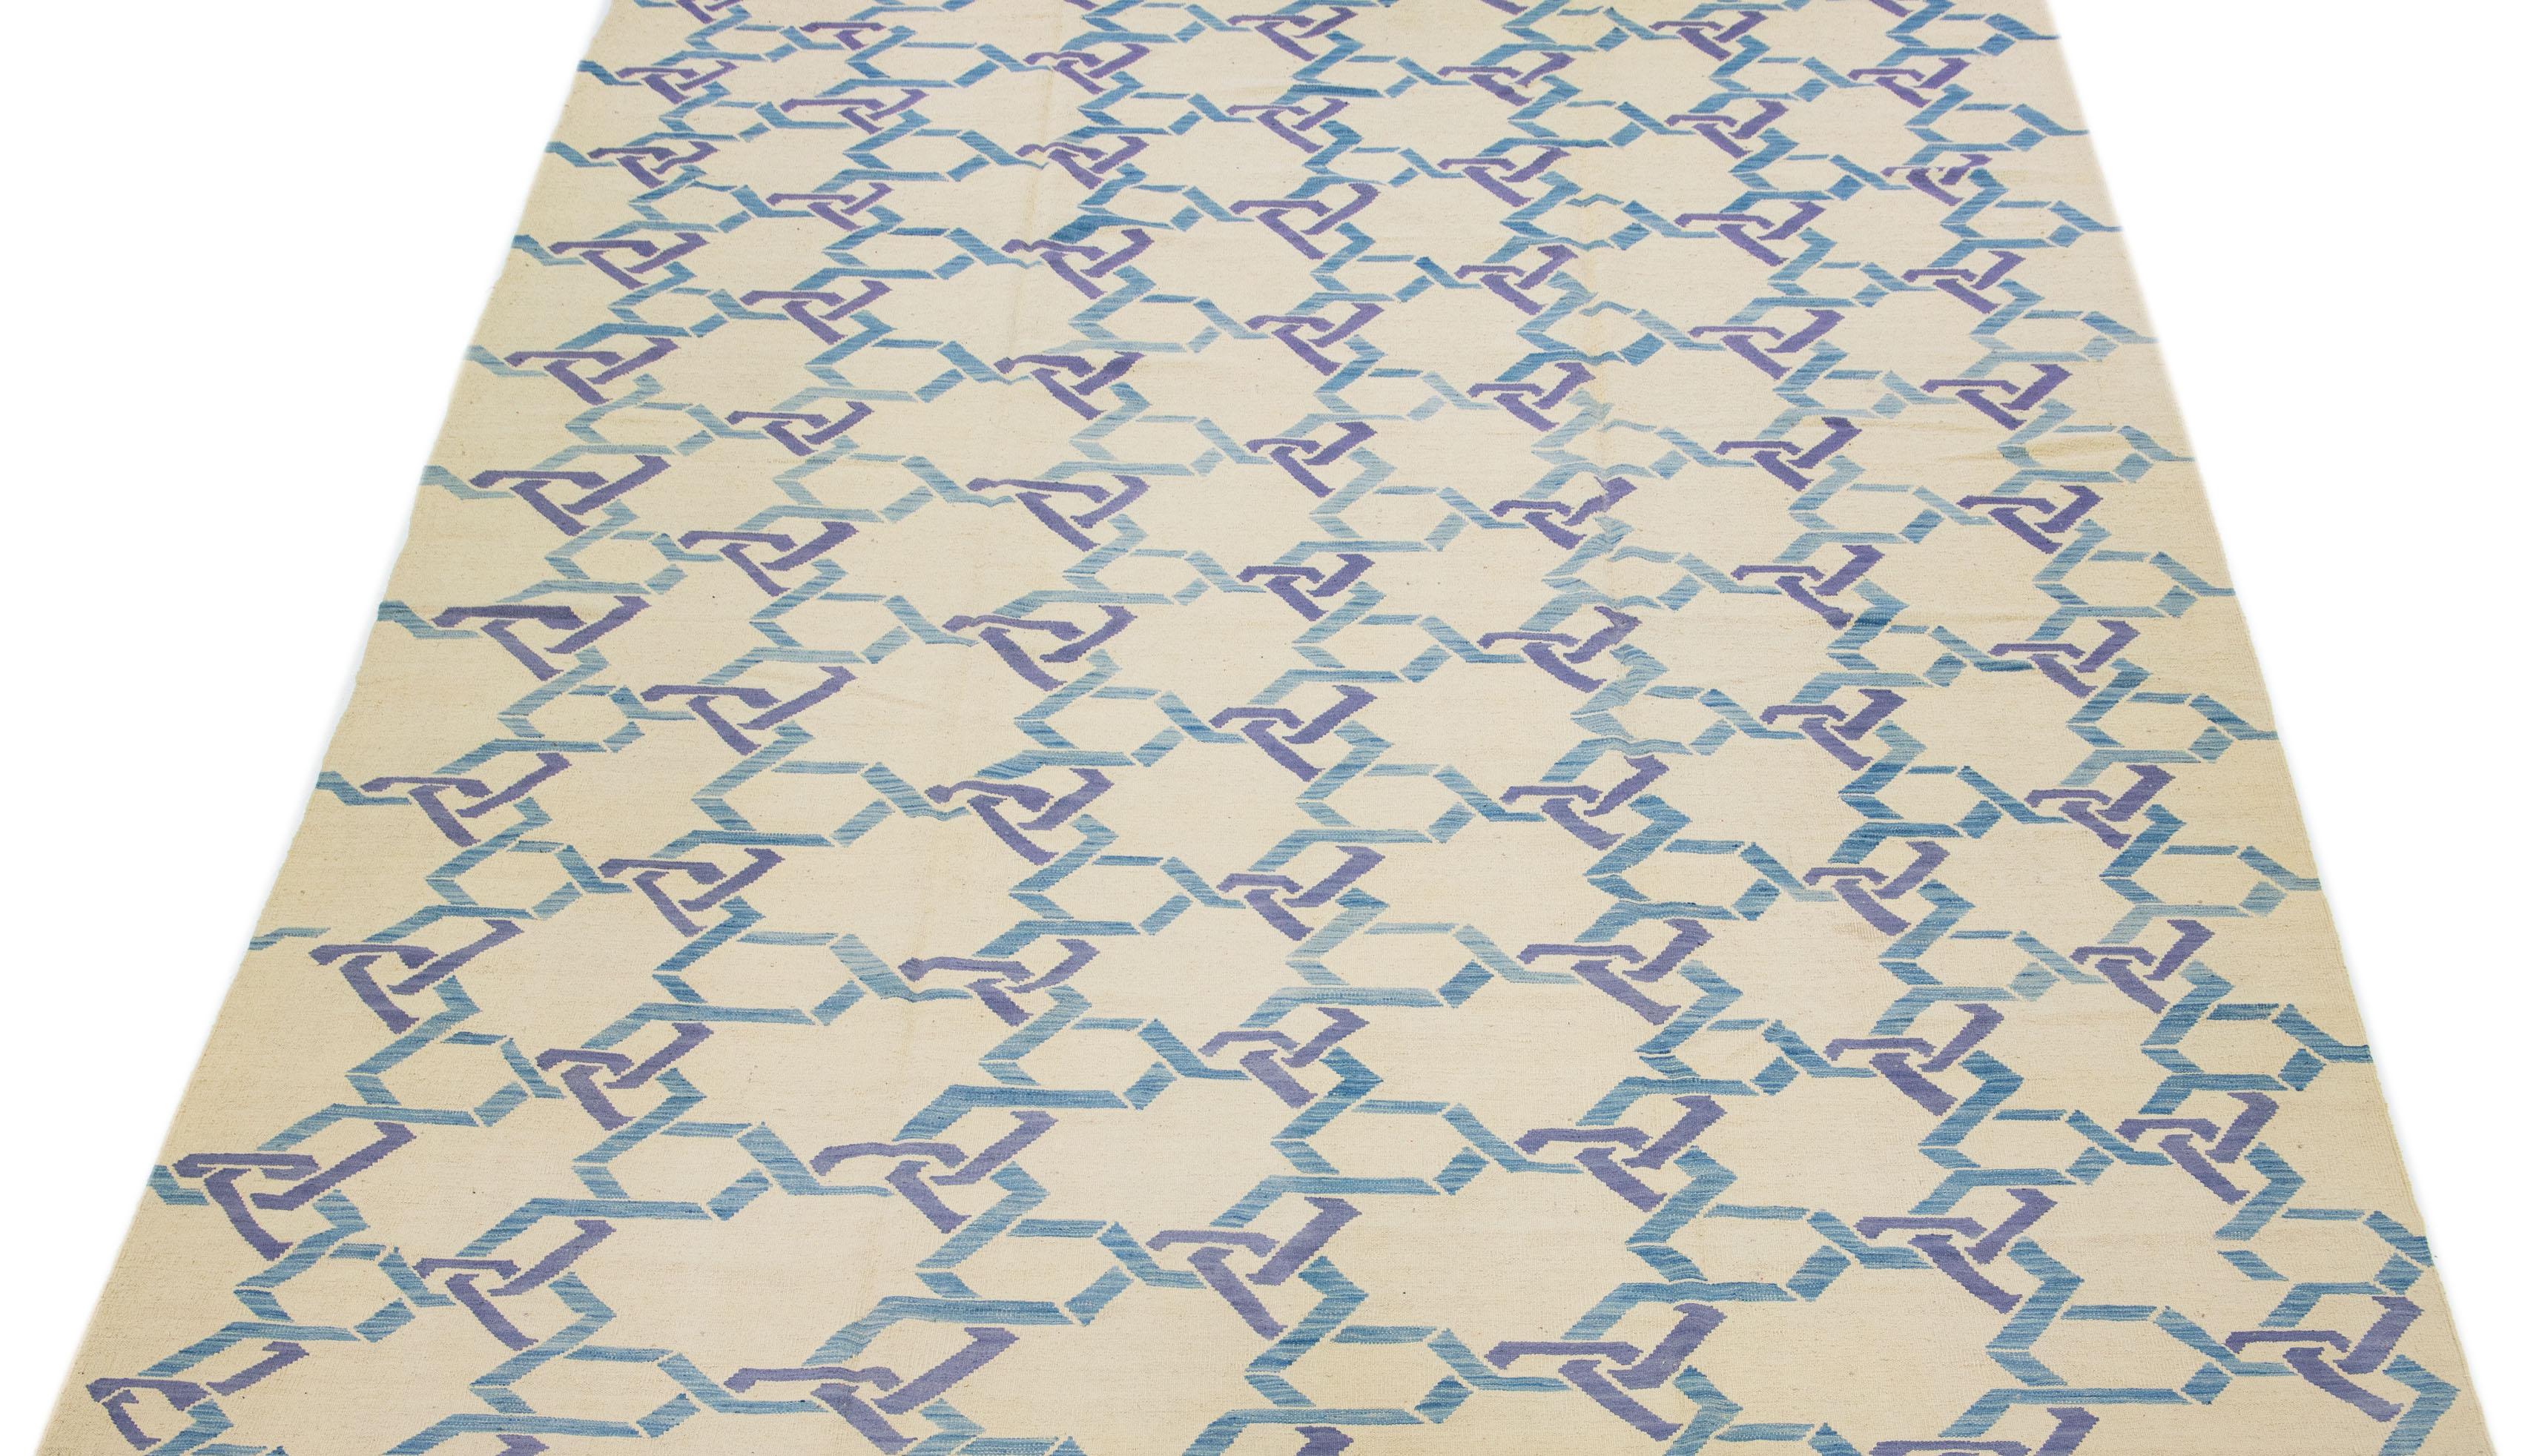 This contemporary Kilim rug is meticulously handwoven with a dominant beige field, highlighted by intricate geometric patterns in shades of blue, providing subtle yet elegant accents.

This rug measures 10' x 13'8